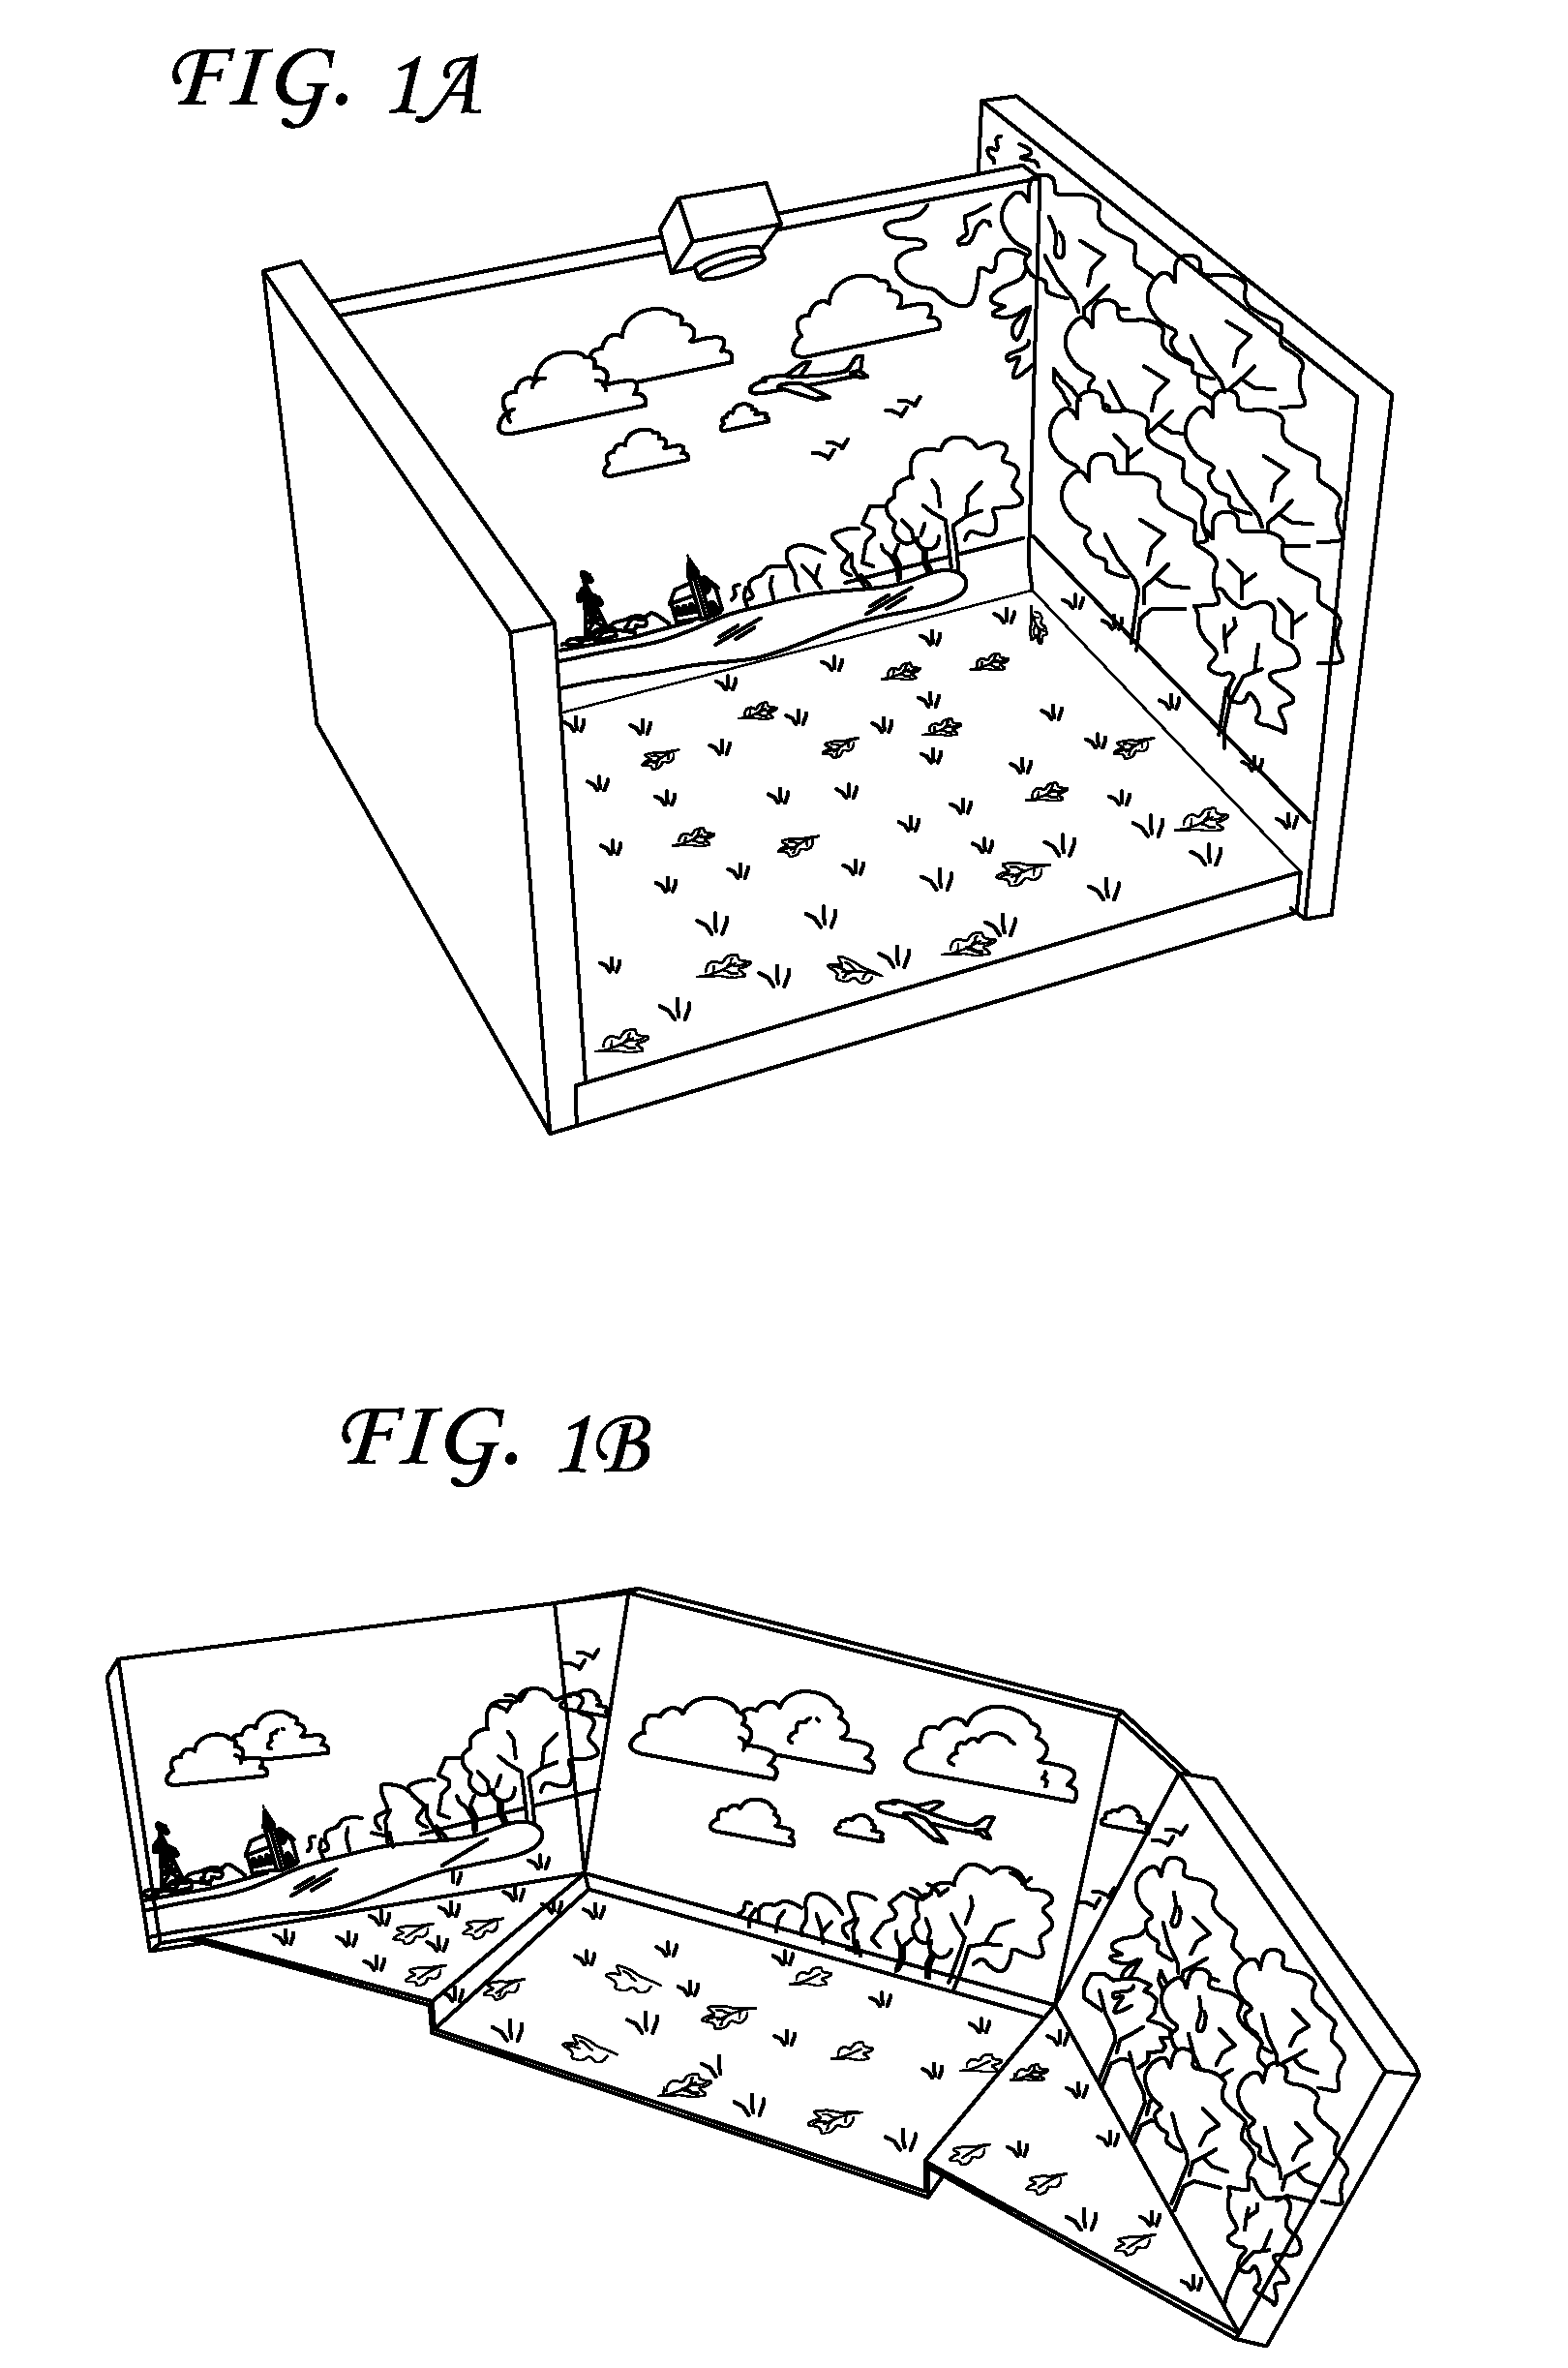 Immersive display system for interacting with three-dimensional content